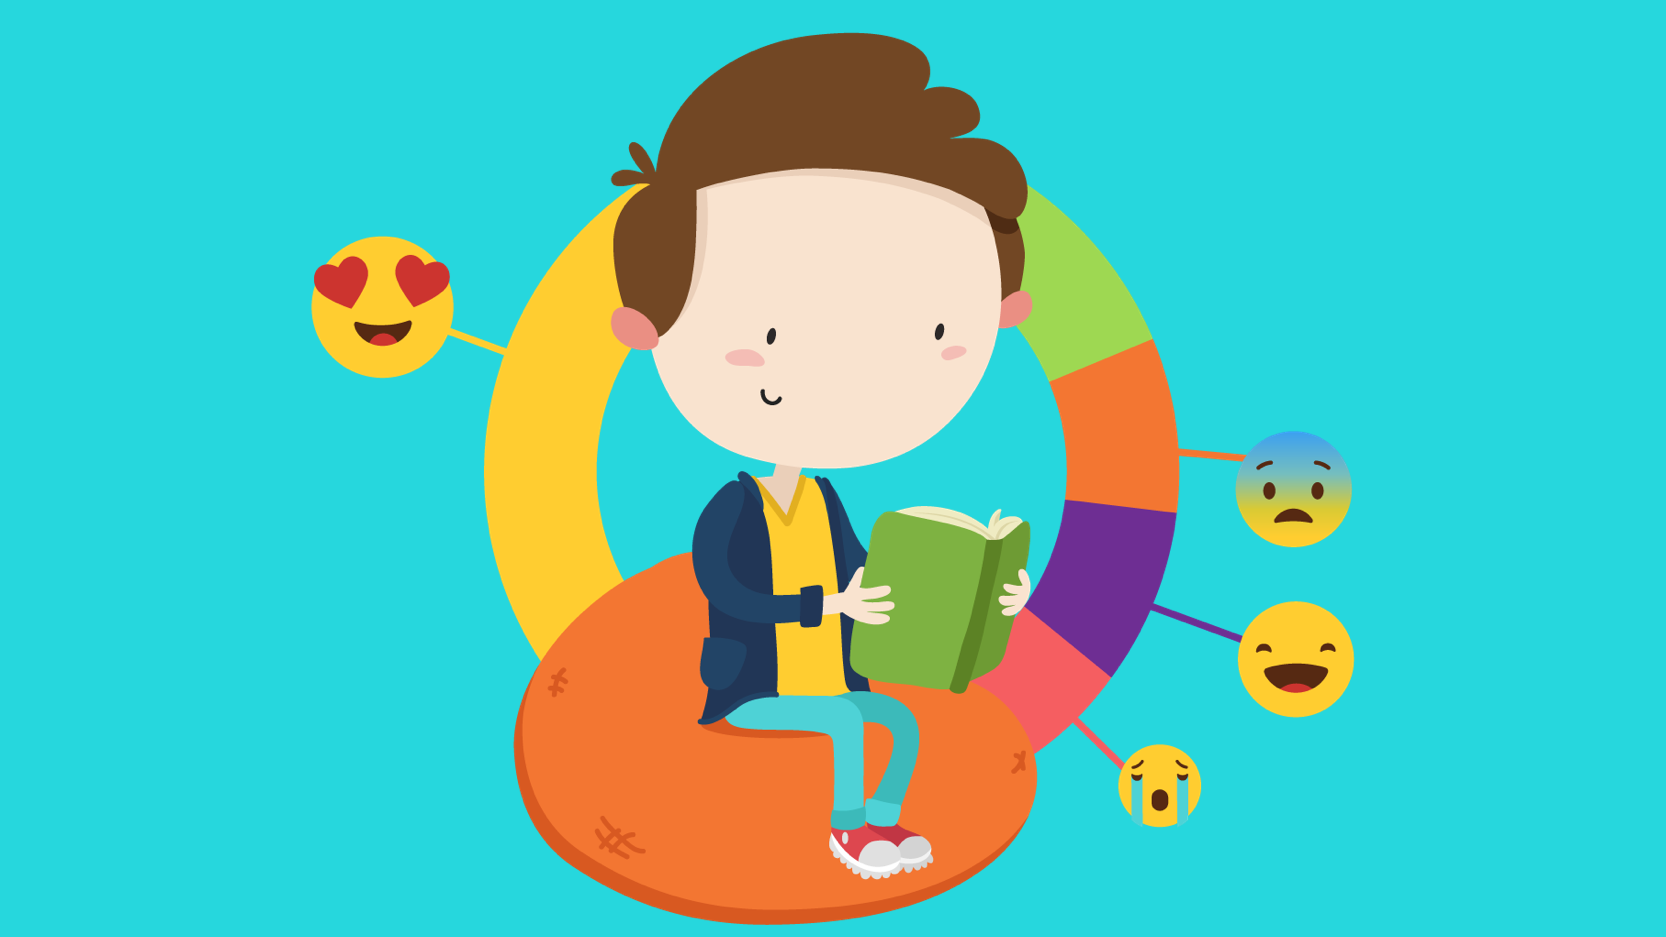 Beek is the emoji-based book review site aiming to change e-commerce in Latin America | TechCrunch